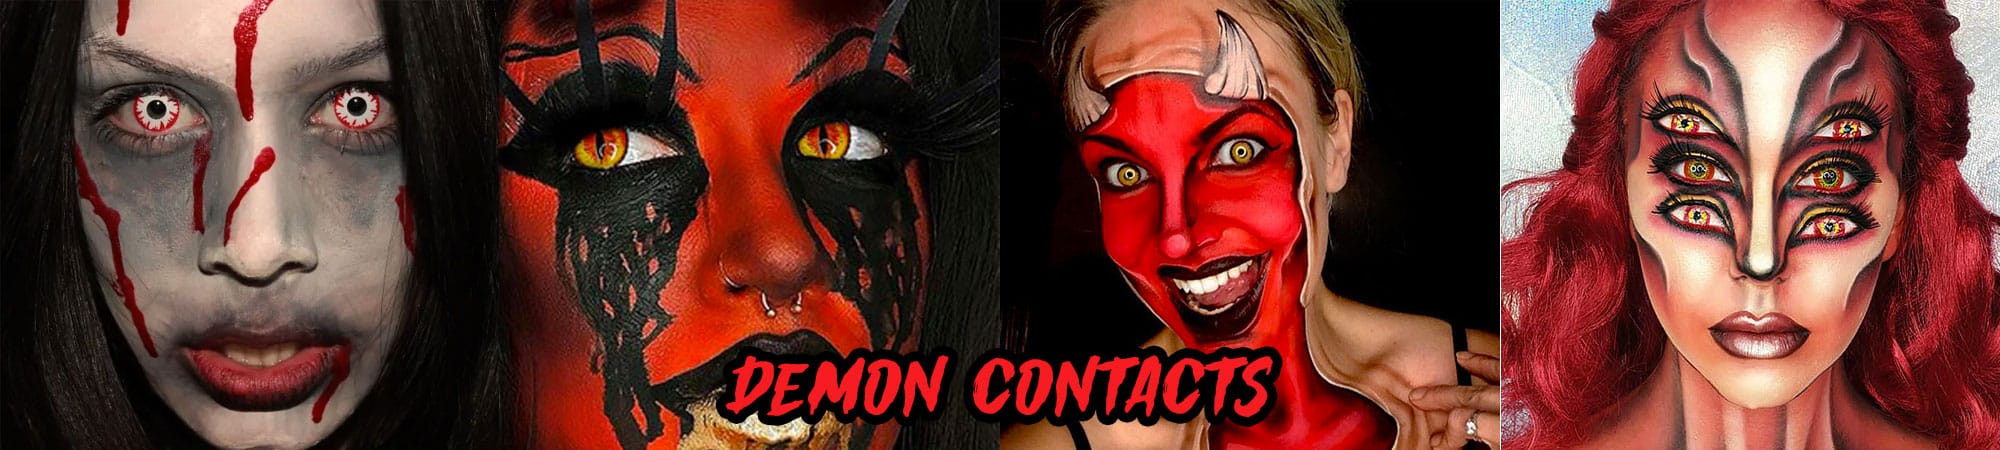 Demon Contacts